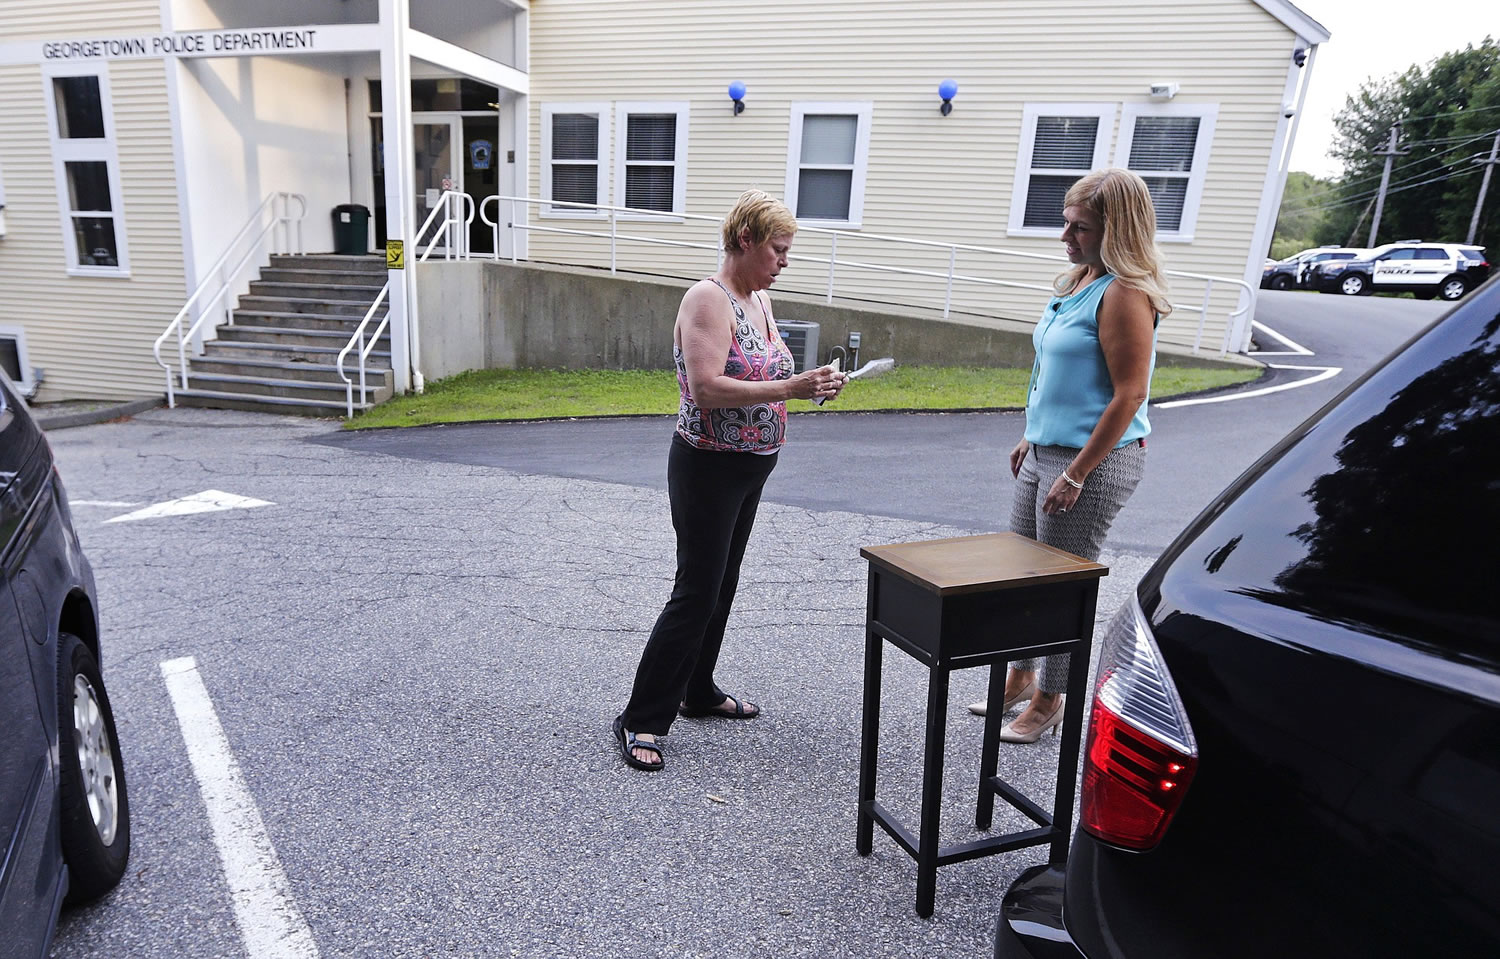 Susan Locke, left, counts out her cash as she purchases a table  from Michele Velleman in the &quot;online safe zone&quot; Monday outside the police station in Georgetown, Mass.